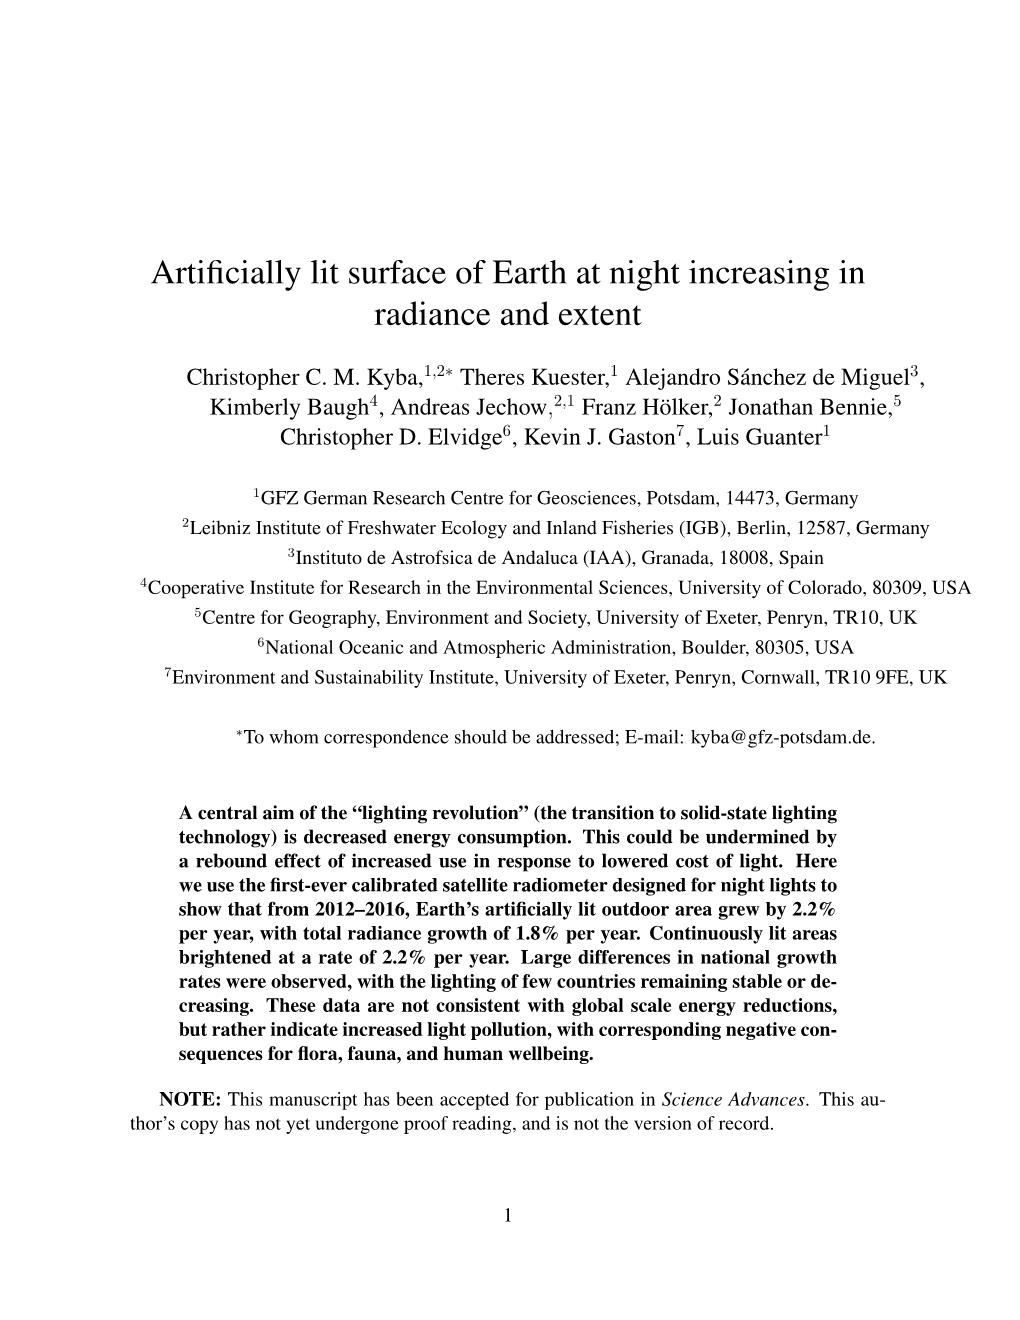 Artificially Lit Surface of Earth at Night Increasing in Radiance and Extent